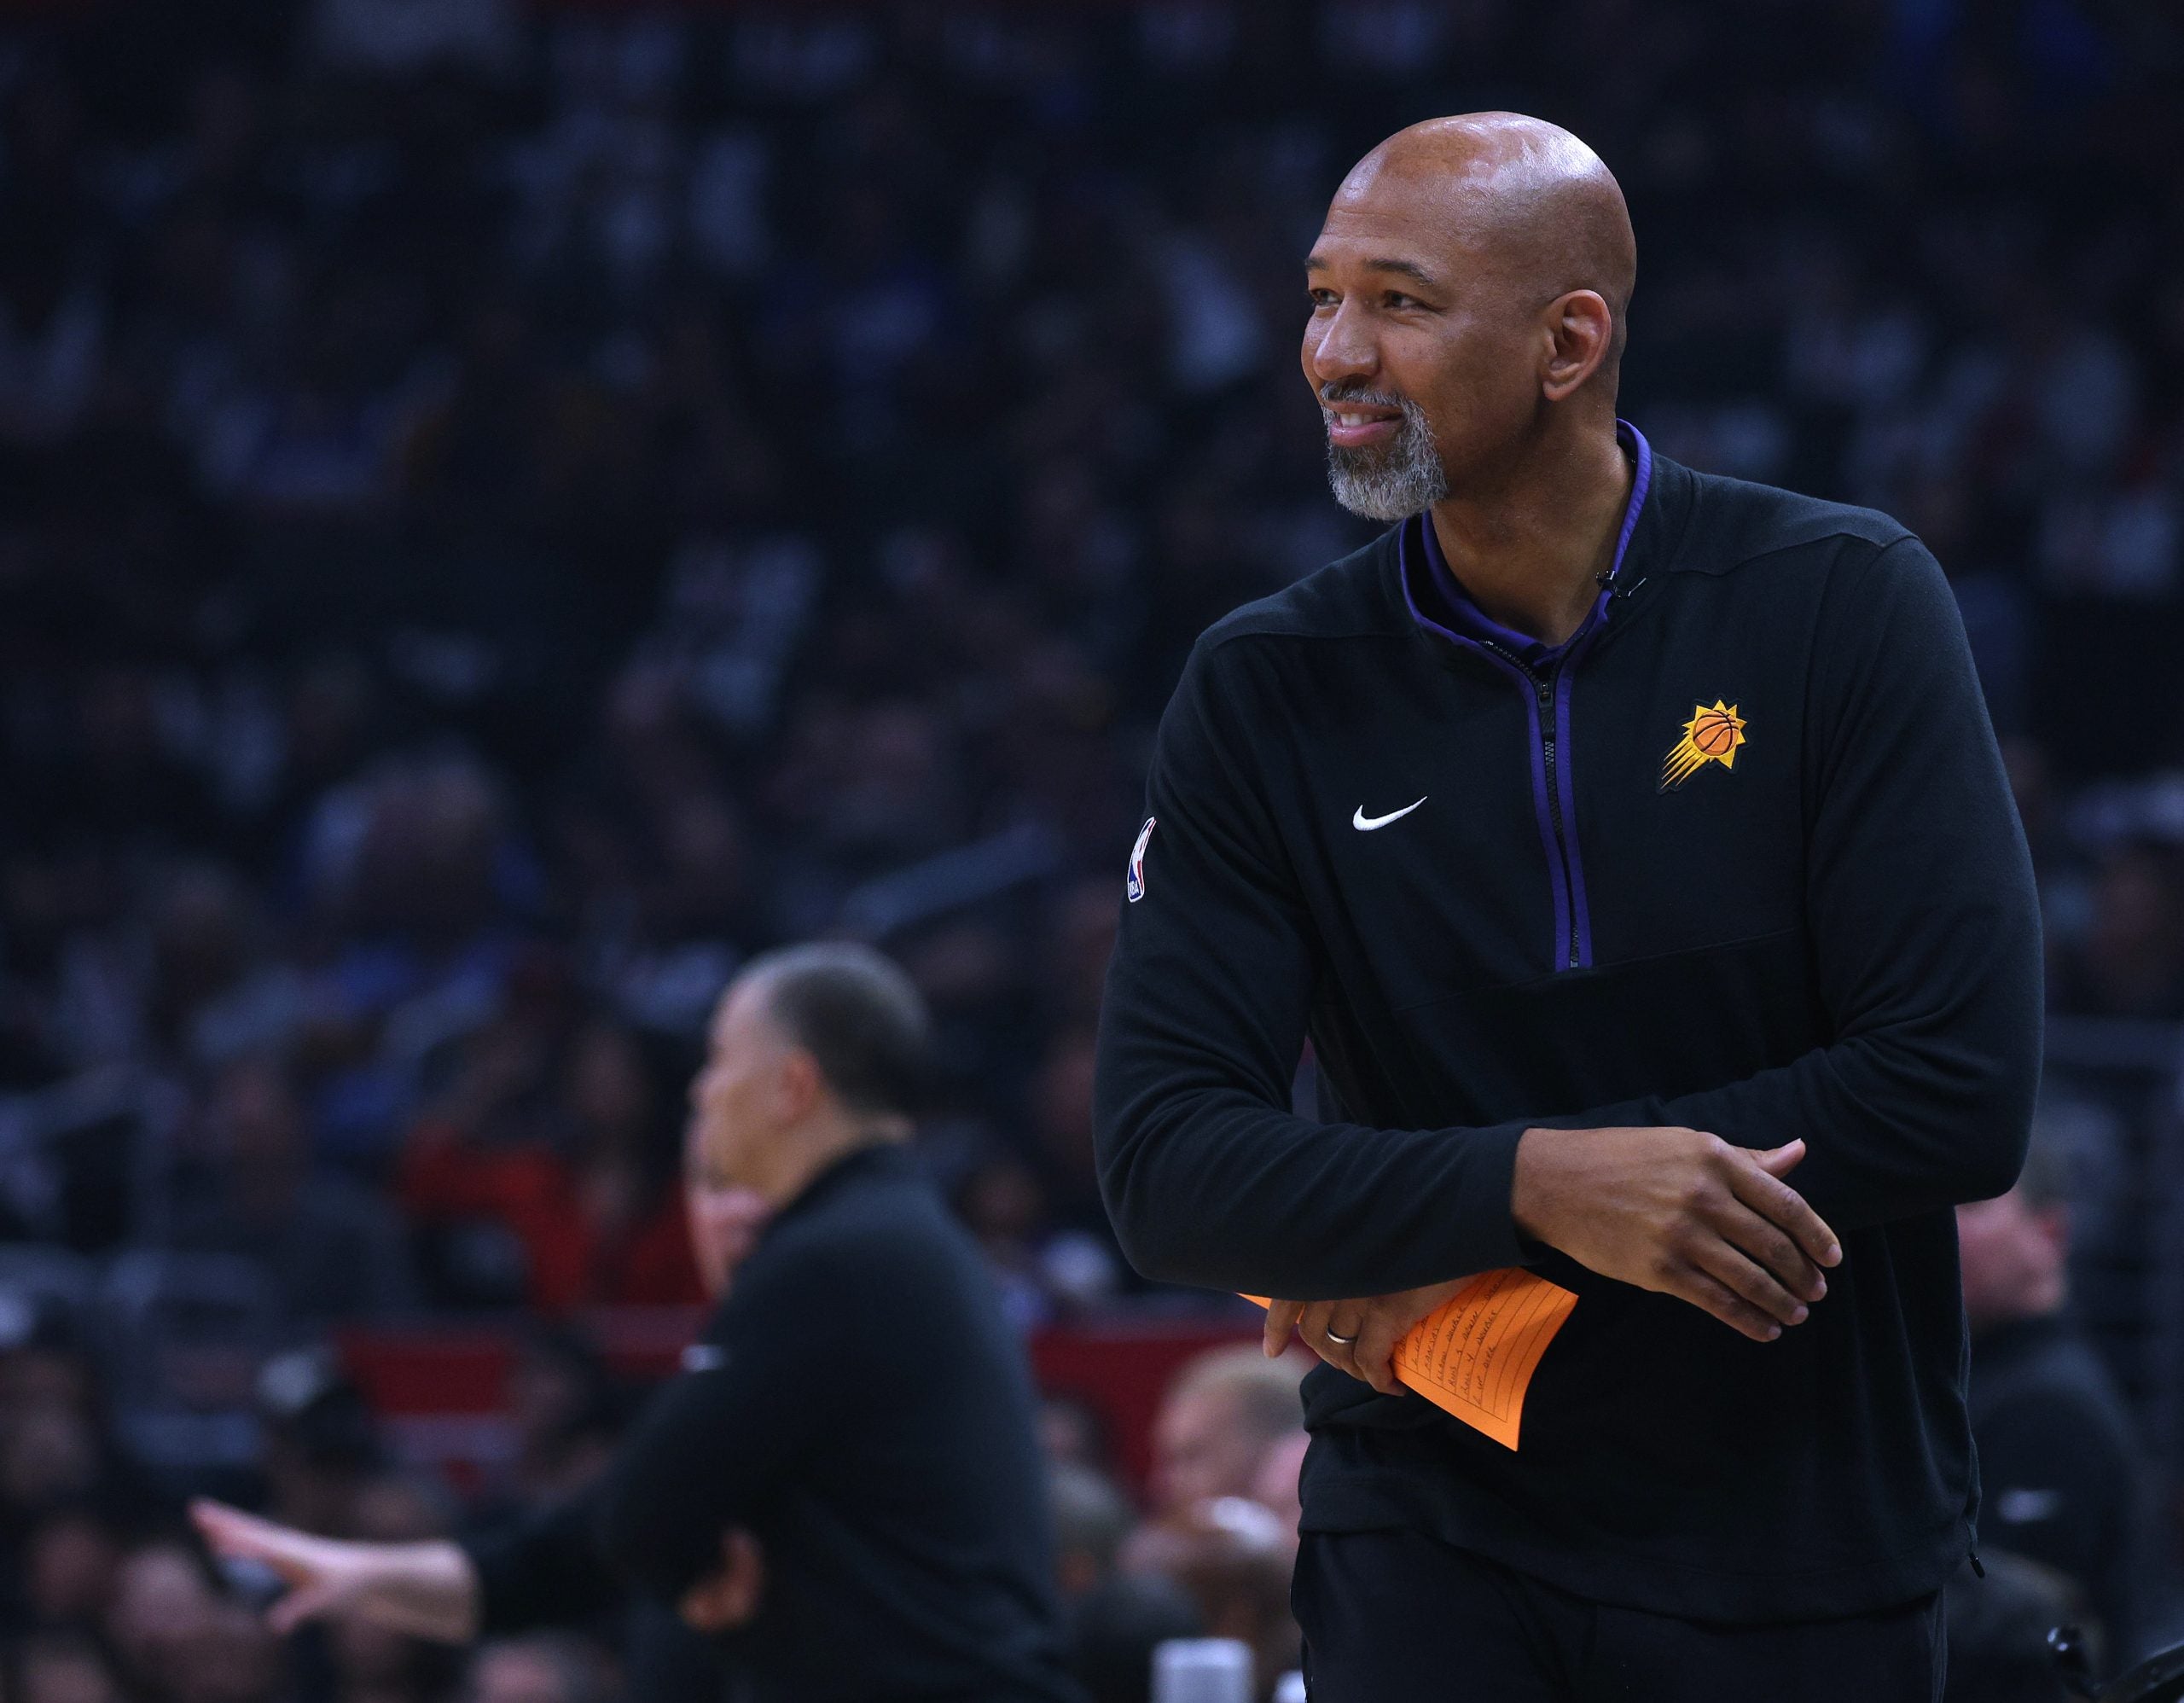 A Black Man Is Now The Highest Paid NBA Coach